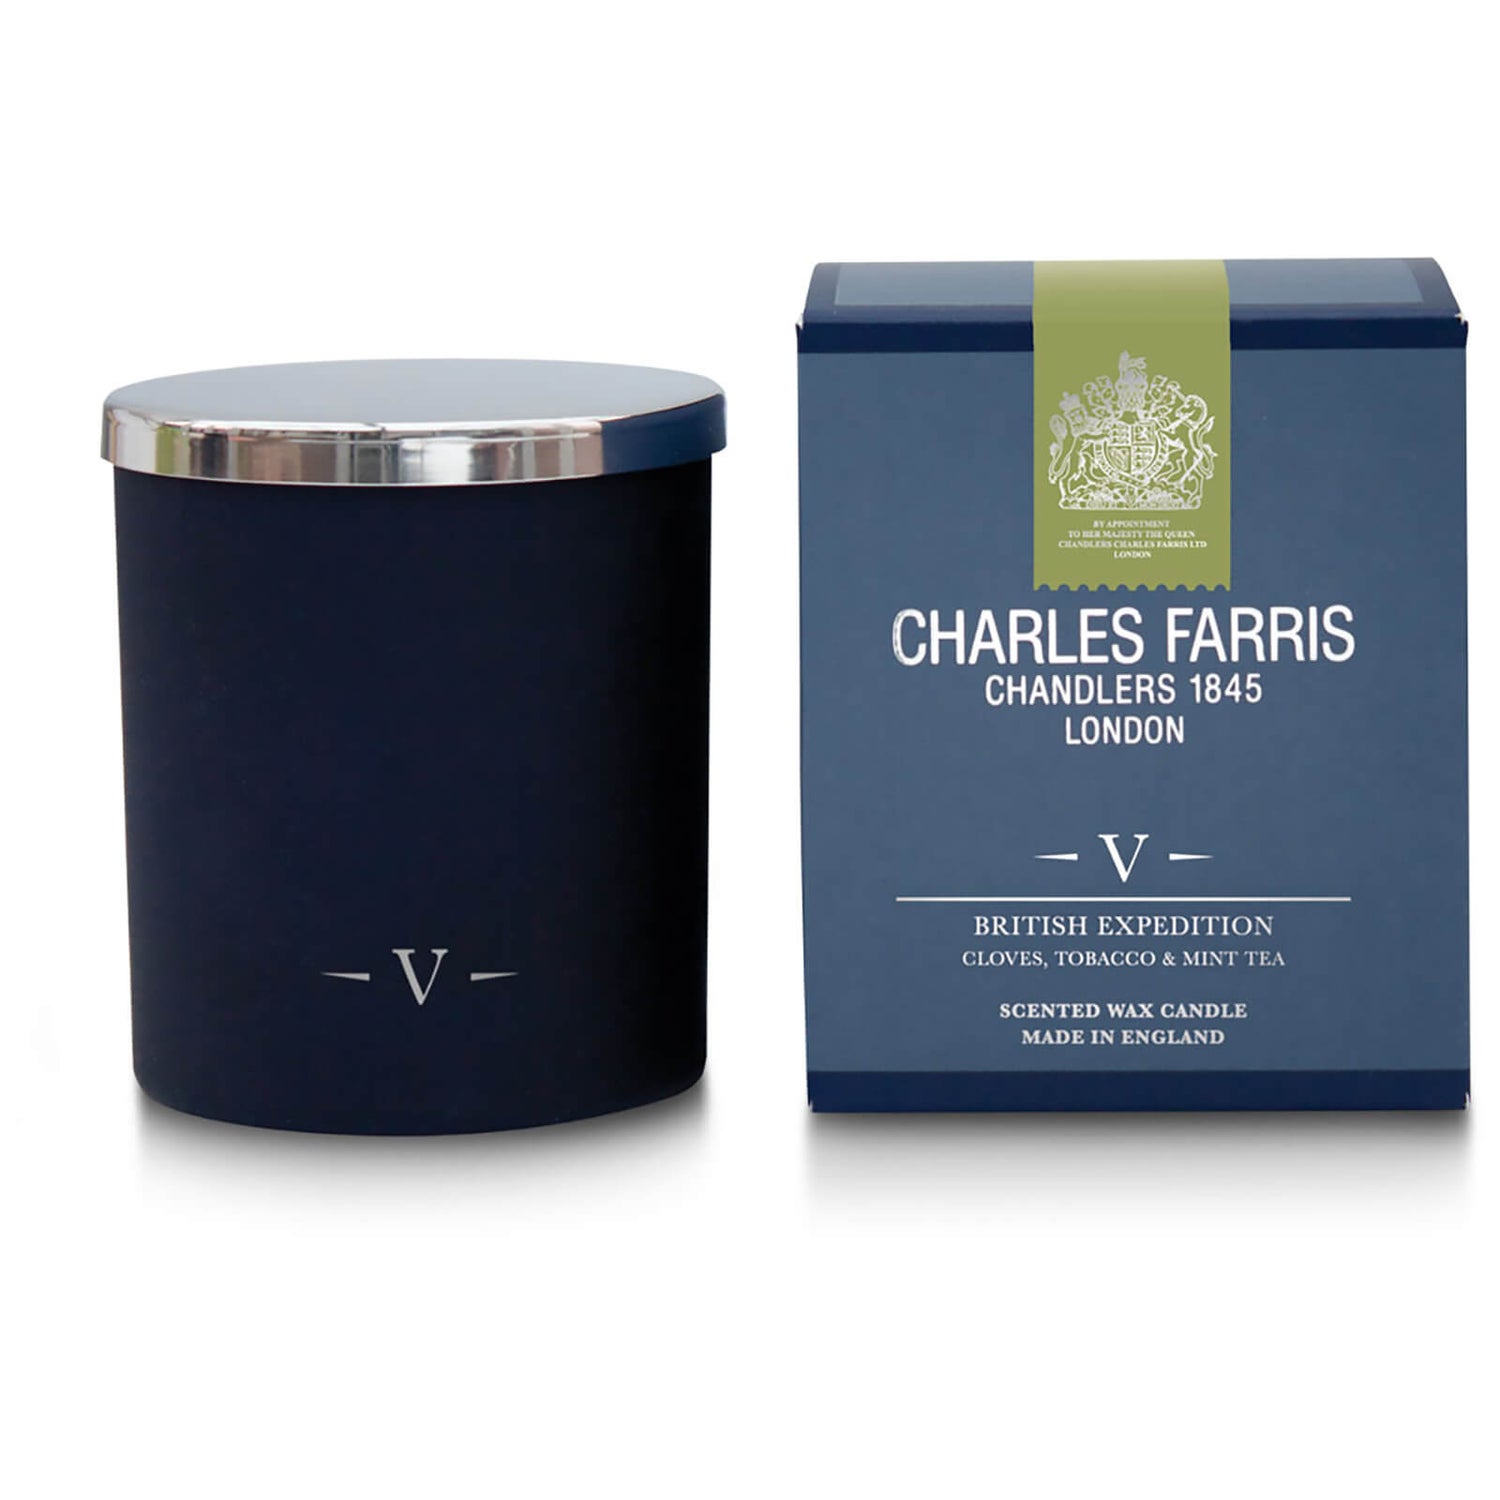 Charles Farris Signature British Expedition Candle 210g